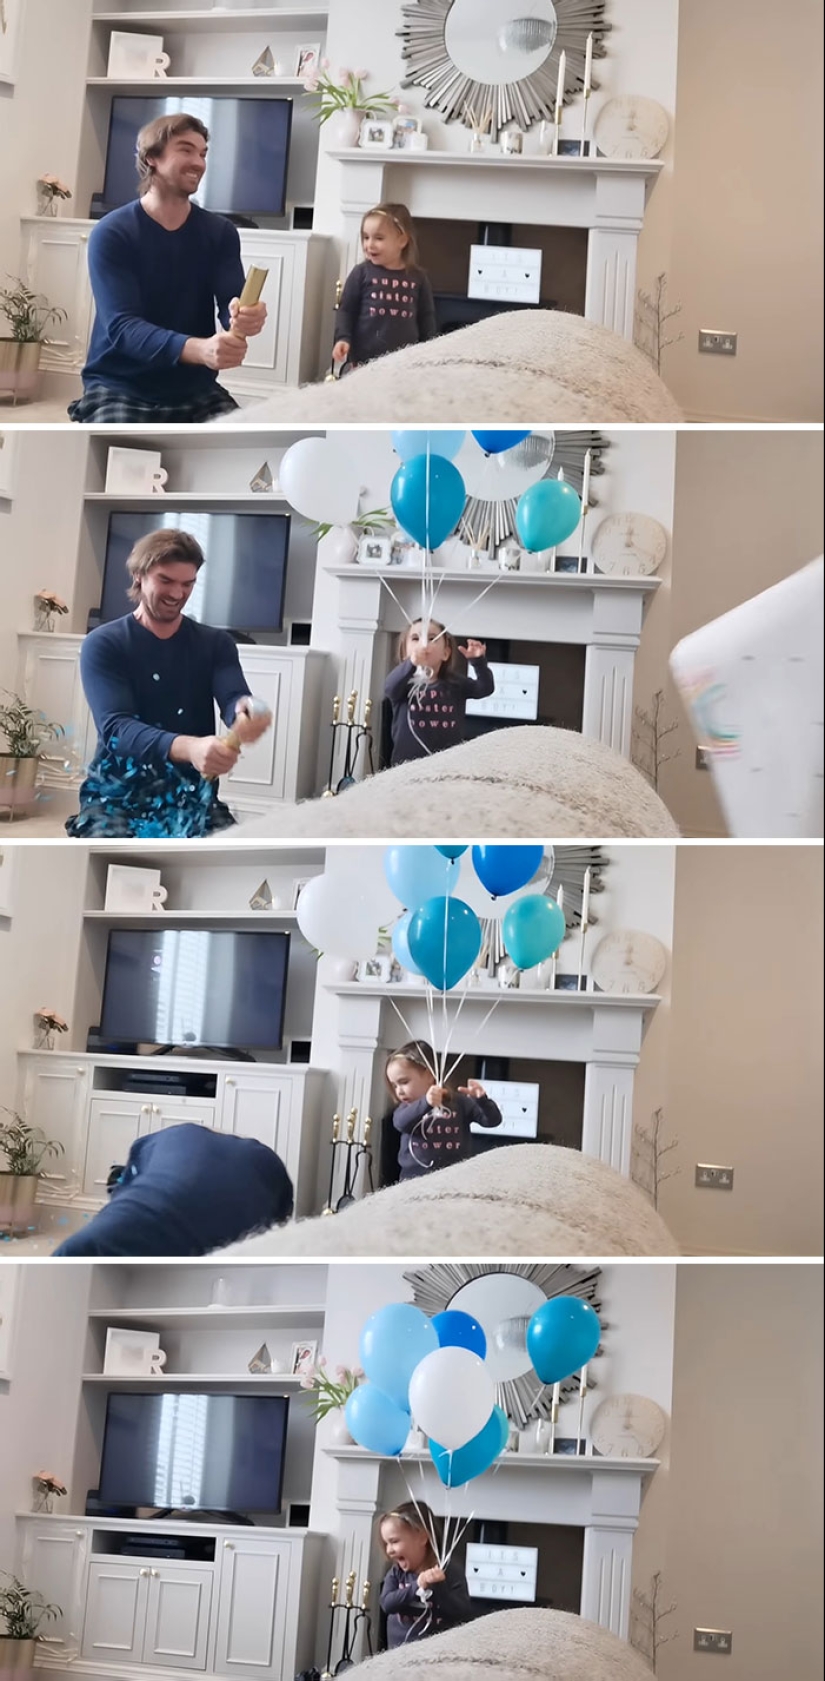 8 Of The Cringiest Posts About Gender Reveal Parties